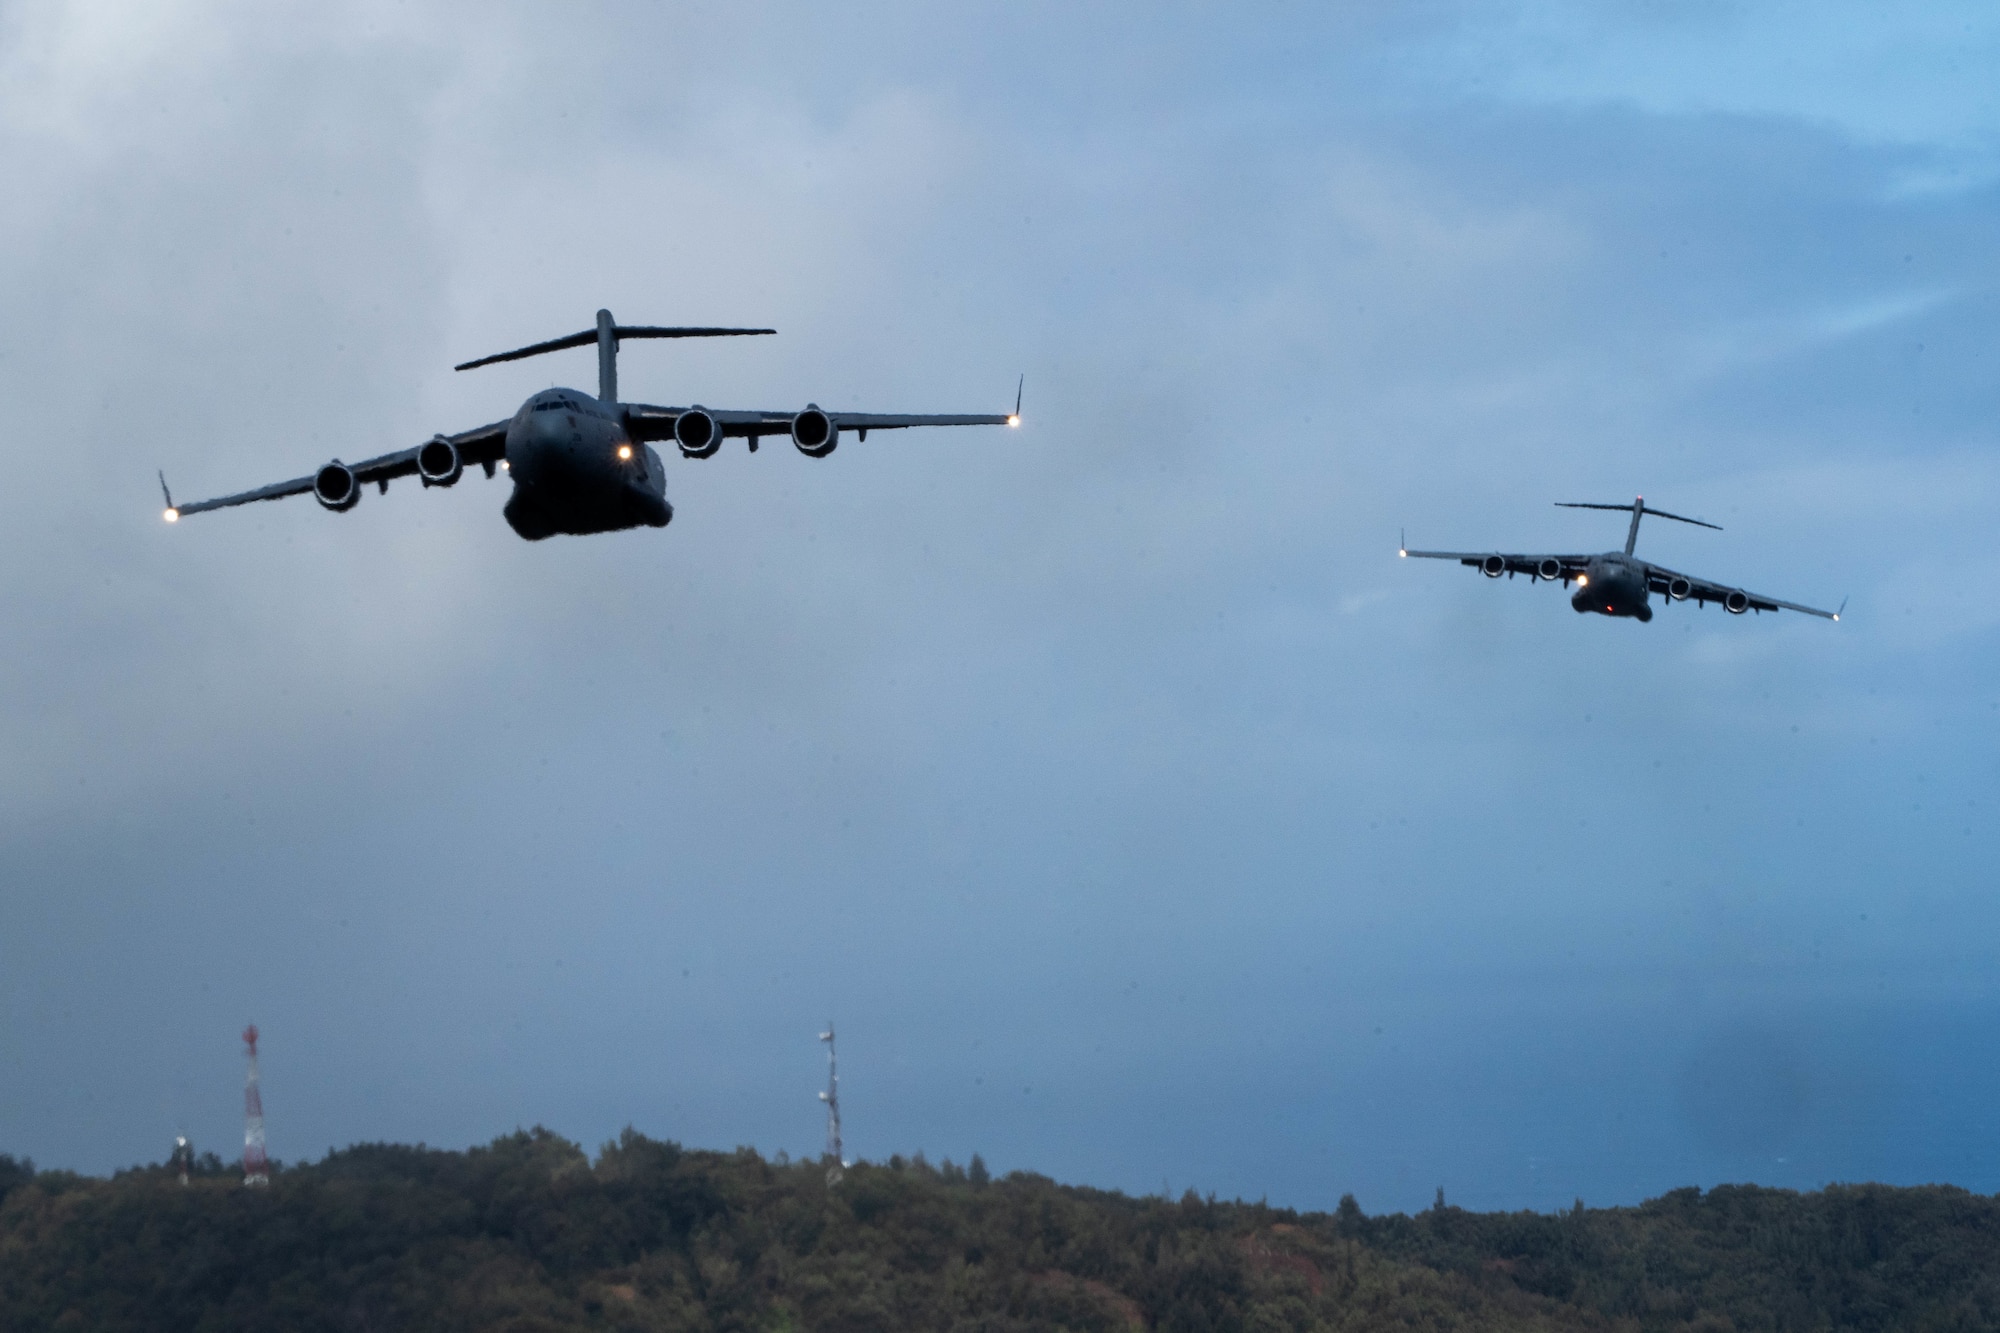 A Royal Australian Air Force C-17 Globemaster III flies in formation with a U.S. C-17 during an aerial maneuver training mission around the Hawaiian islands as part of Exercise Global Dexterity 2022 at Joint Base Pearl Harbor-Hickam, Hawaii, May 4, 2022. The RAAF and USAF conducted joint flying missions alongside each other and swapped aircrew members to better learn of each others’ procedures and techniques. (U.S. Air Force photo by Airman 1st Class Makensie Cooper)